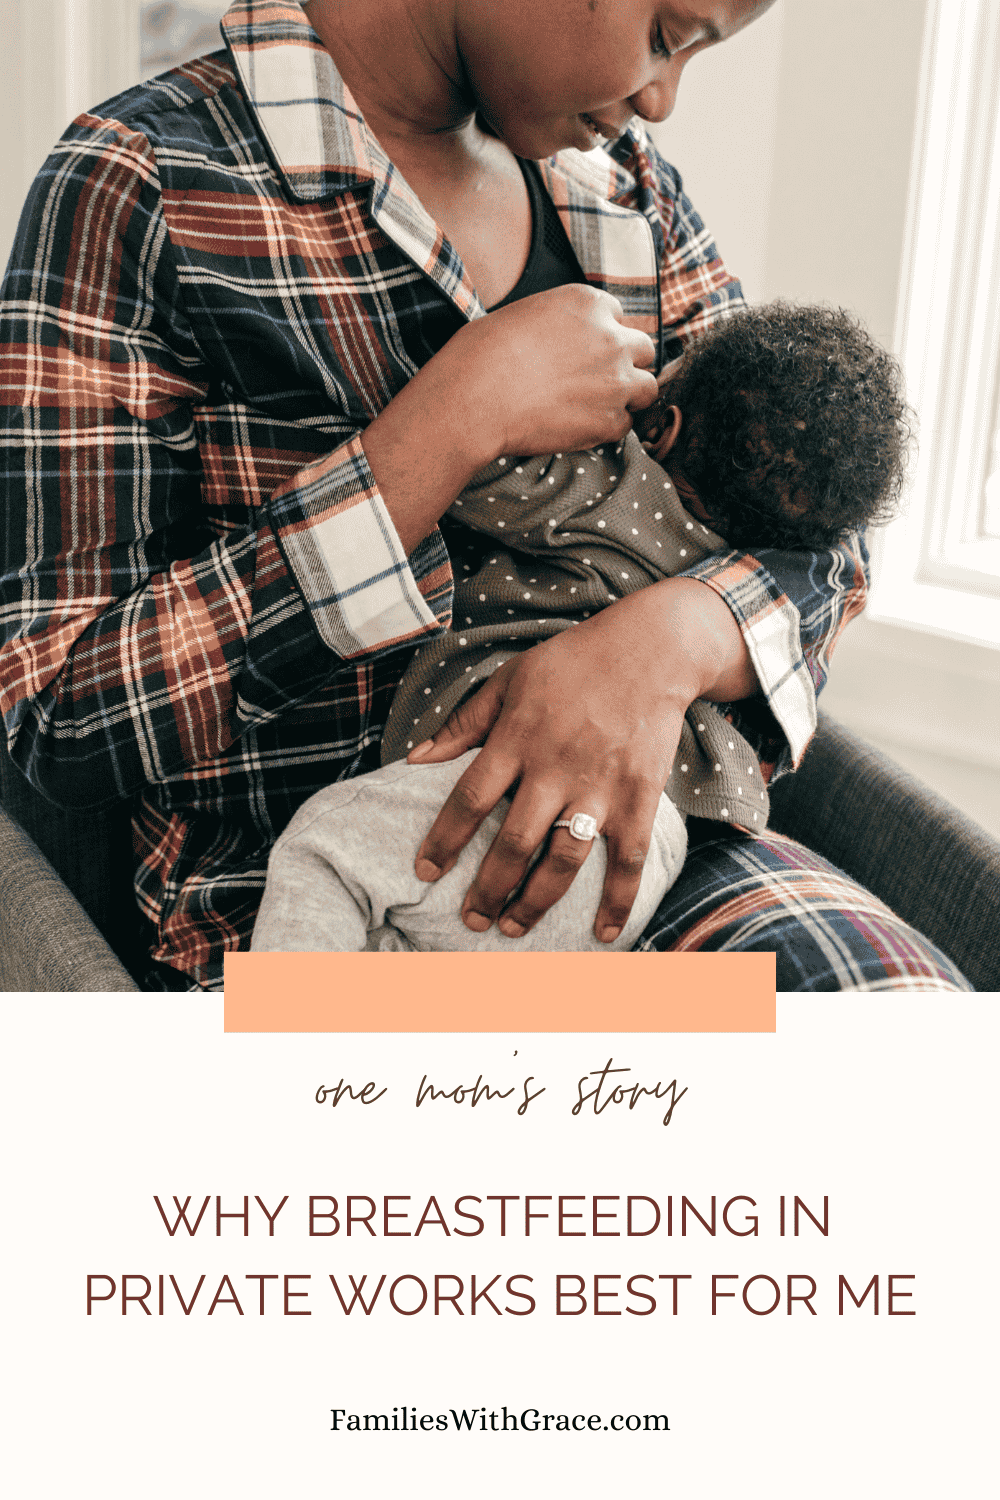 Why breastfeeding in private works best for me